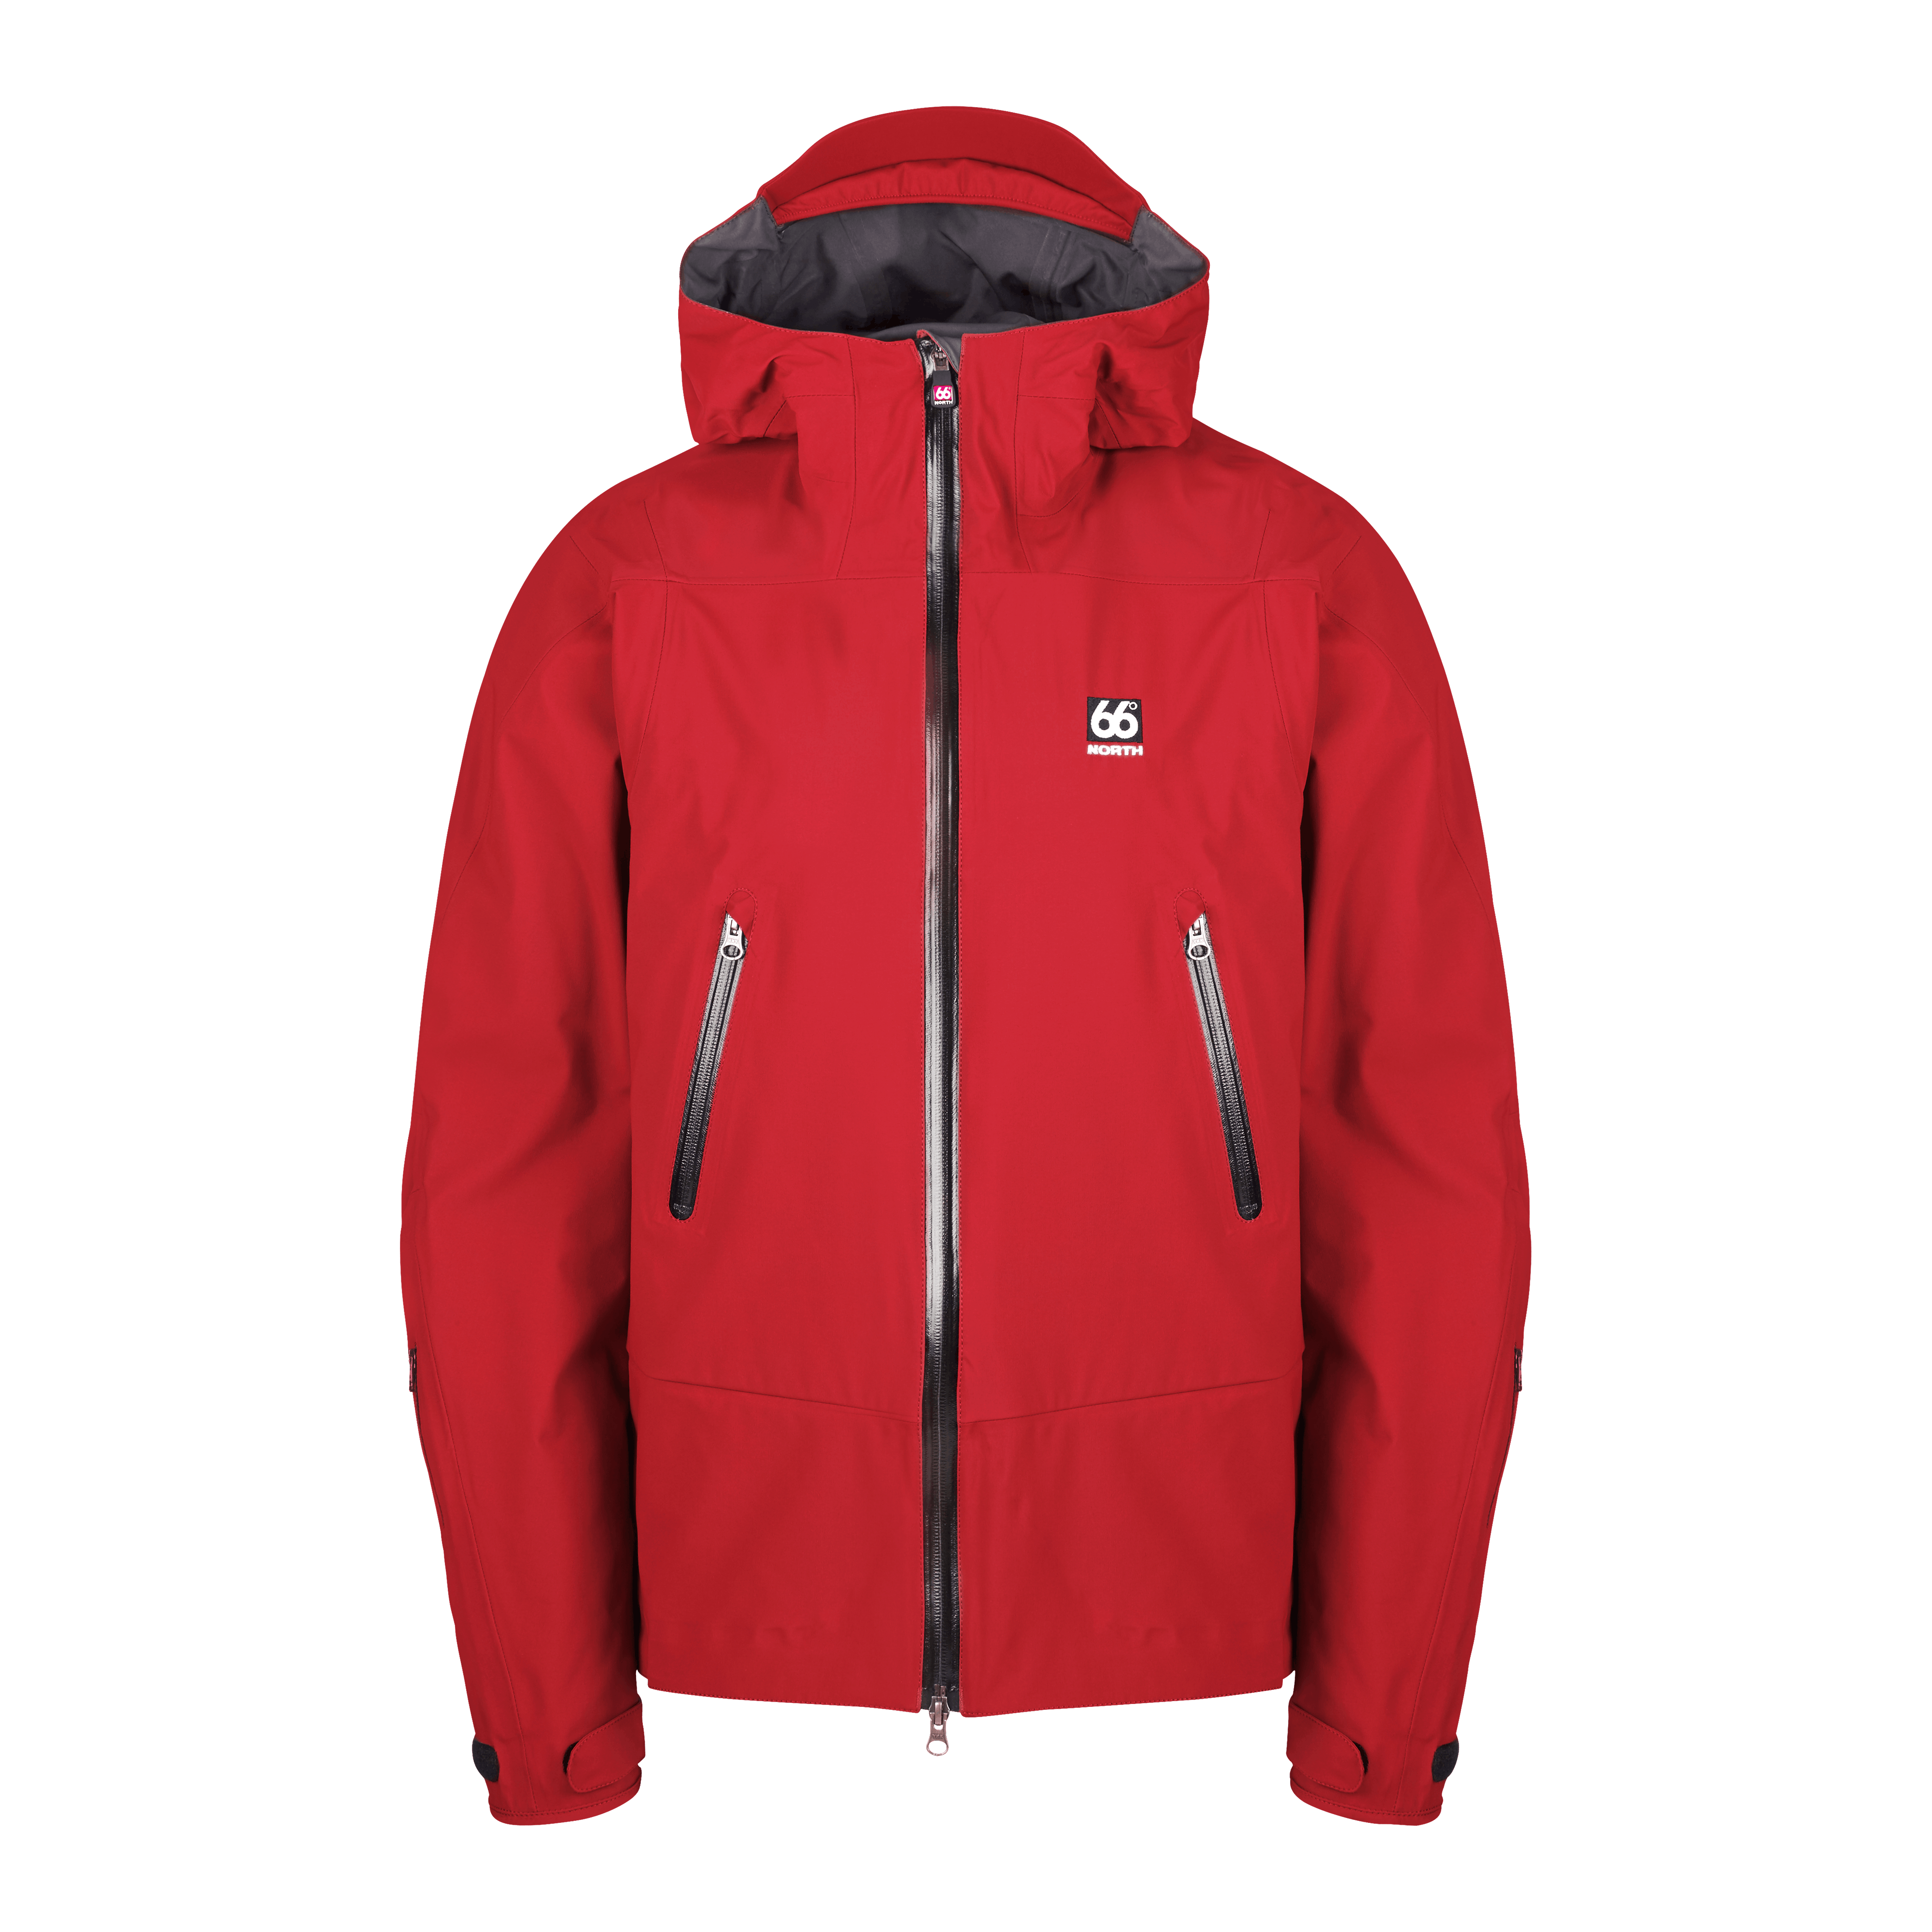 66 North Men's Snæfell Jackets & Coats - Red - 2xl